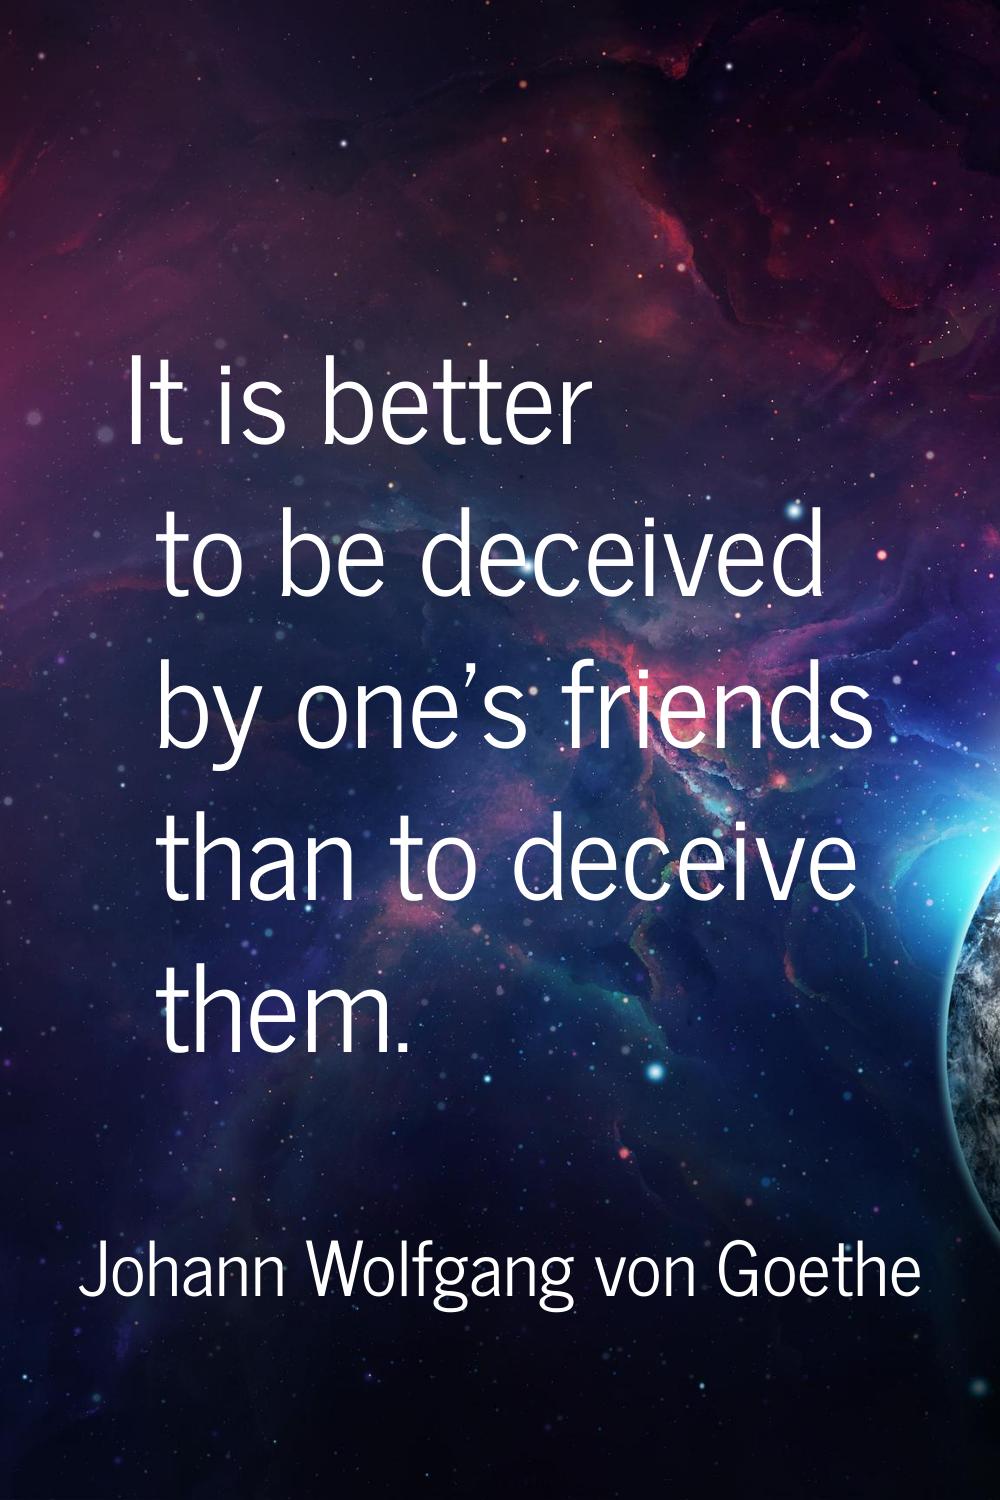 It is better to be deceived by one's friends than to deceive them.